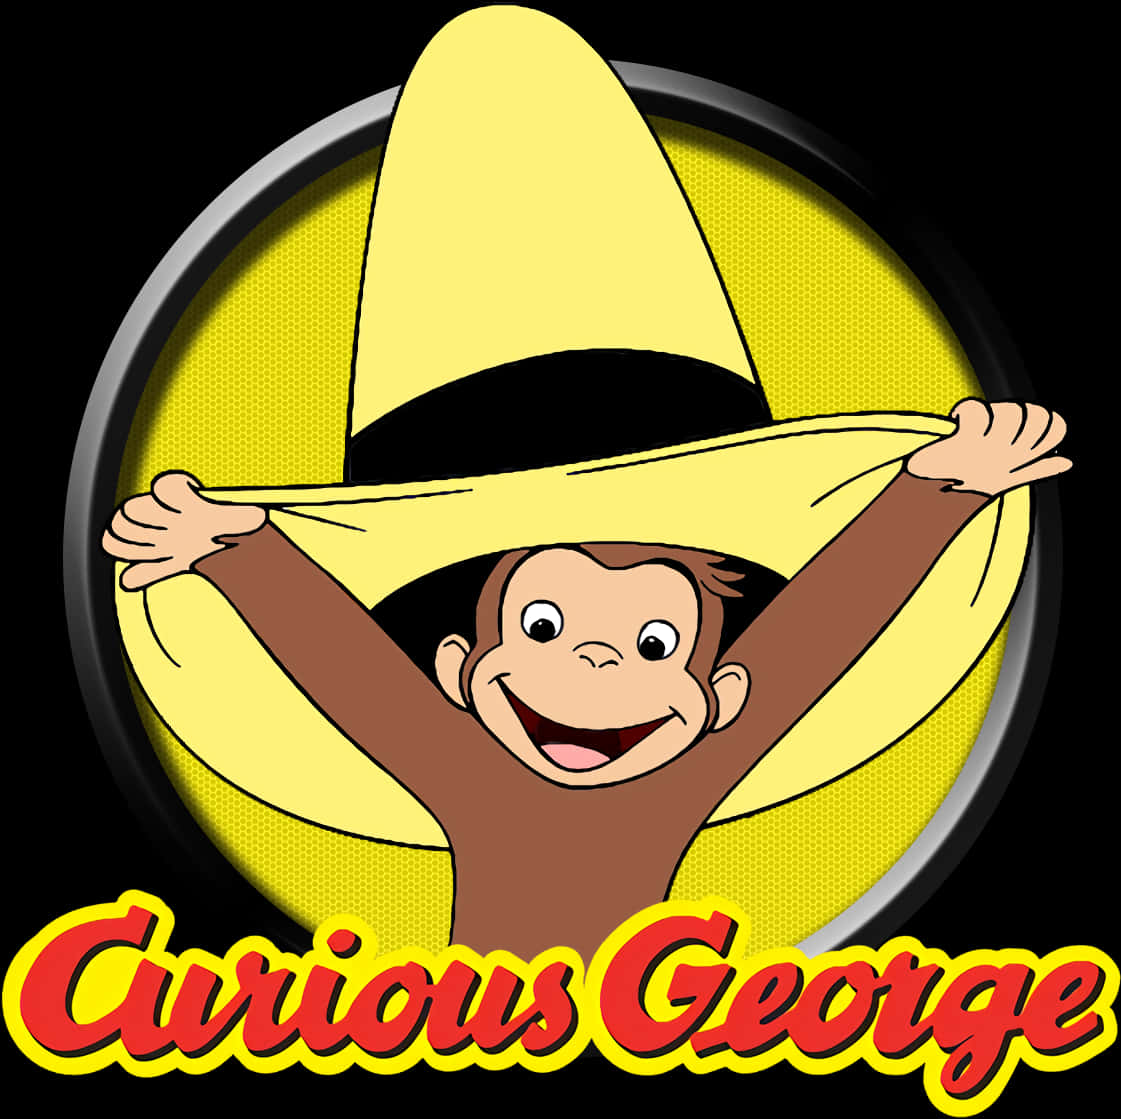 8cnh3a - Curious George With Yellow Hat, Hd Png Download